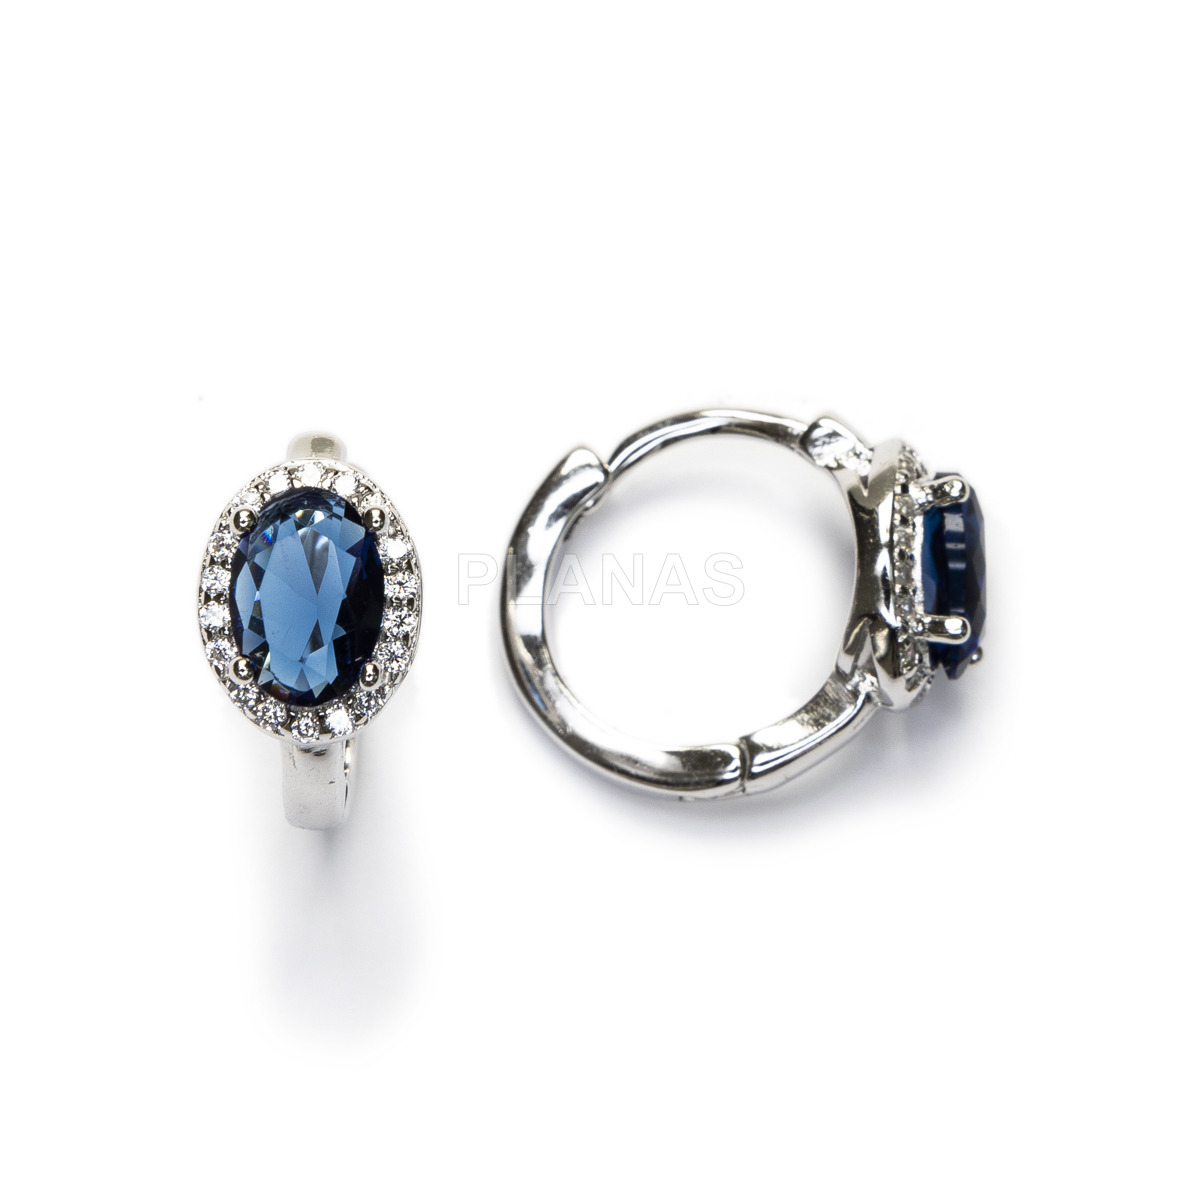 Rings in rhodium-plated sterling silver and zircons.